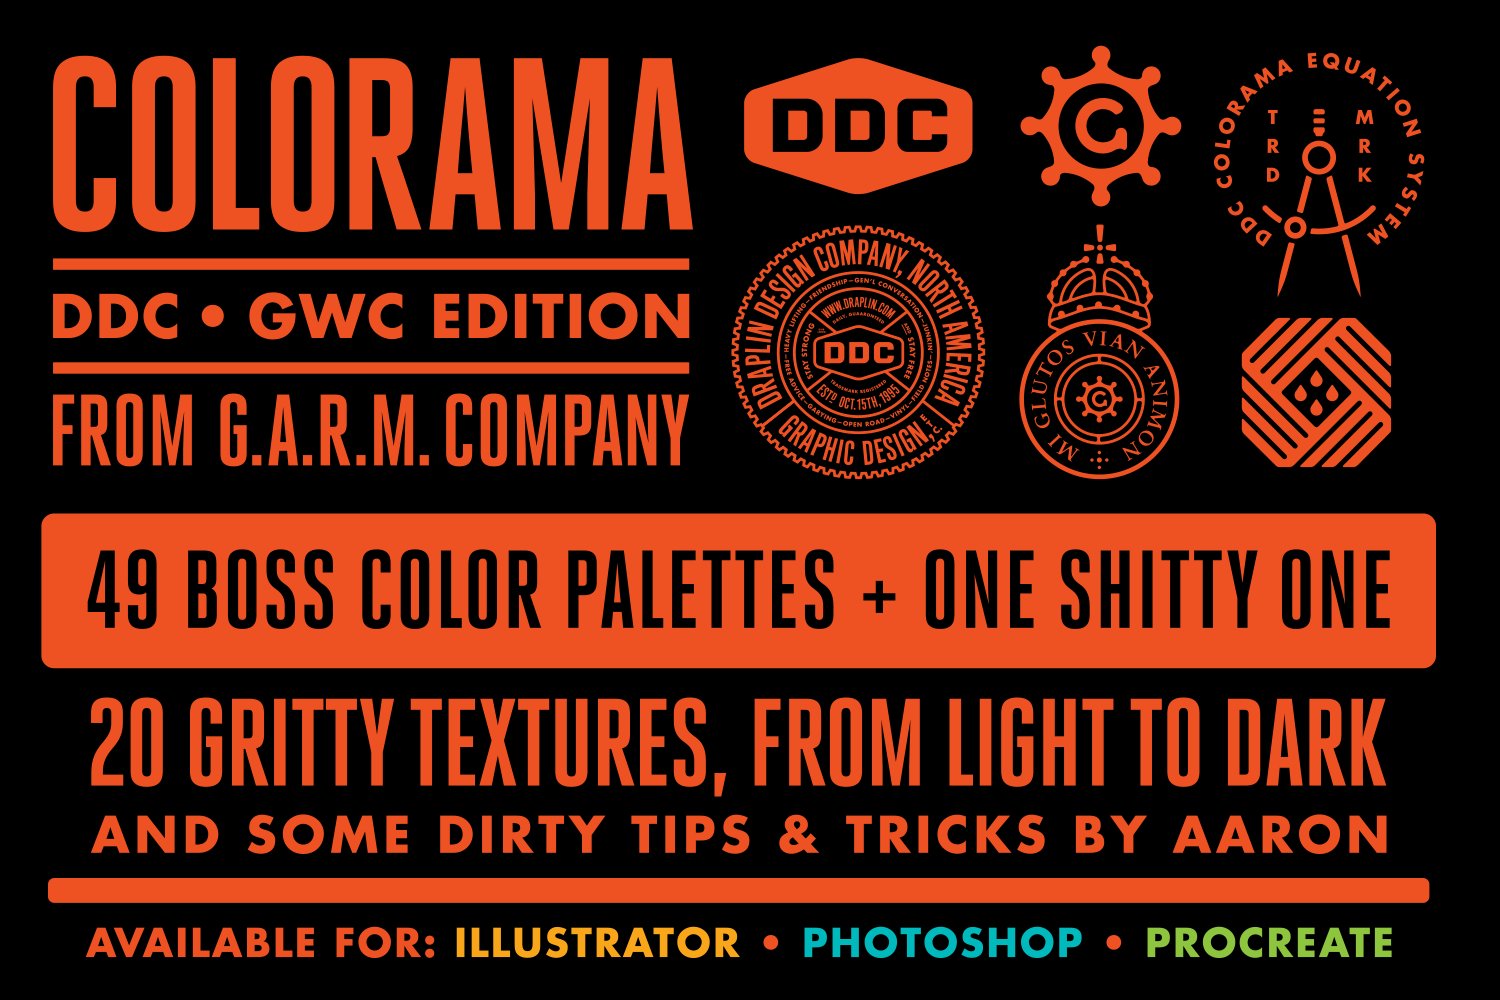 Colorama: DDC/GWC Edn. (Photoshop)preview image.